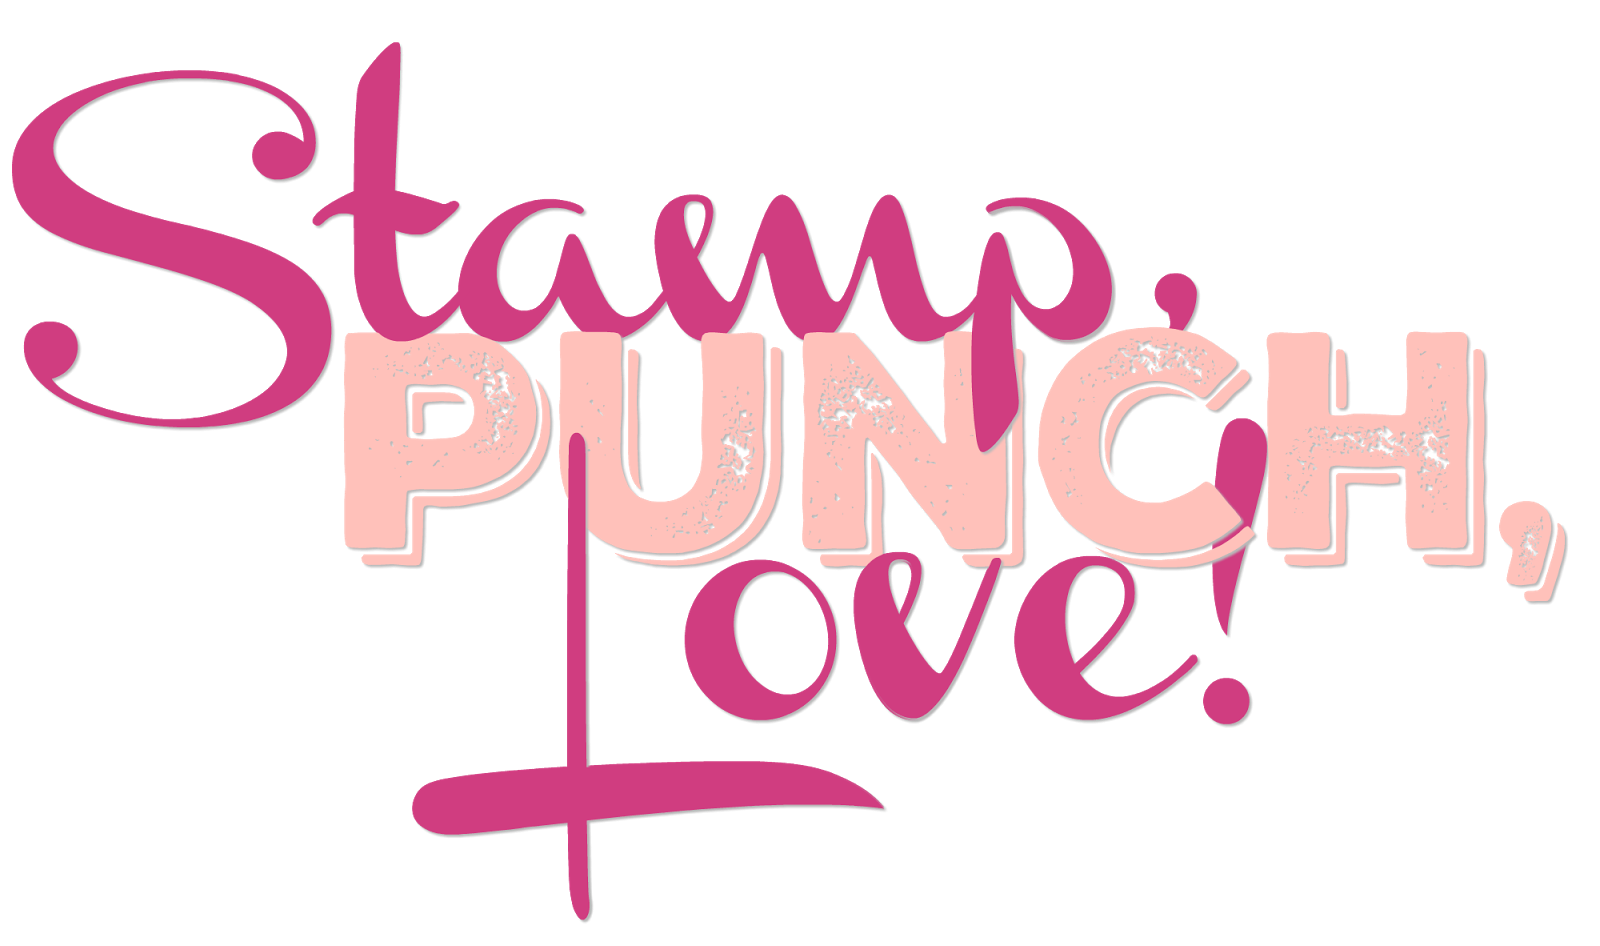 Stamp, Punch, Love!